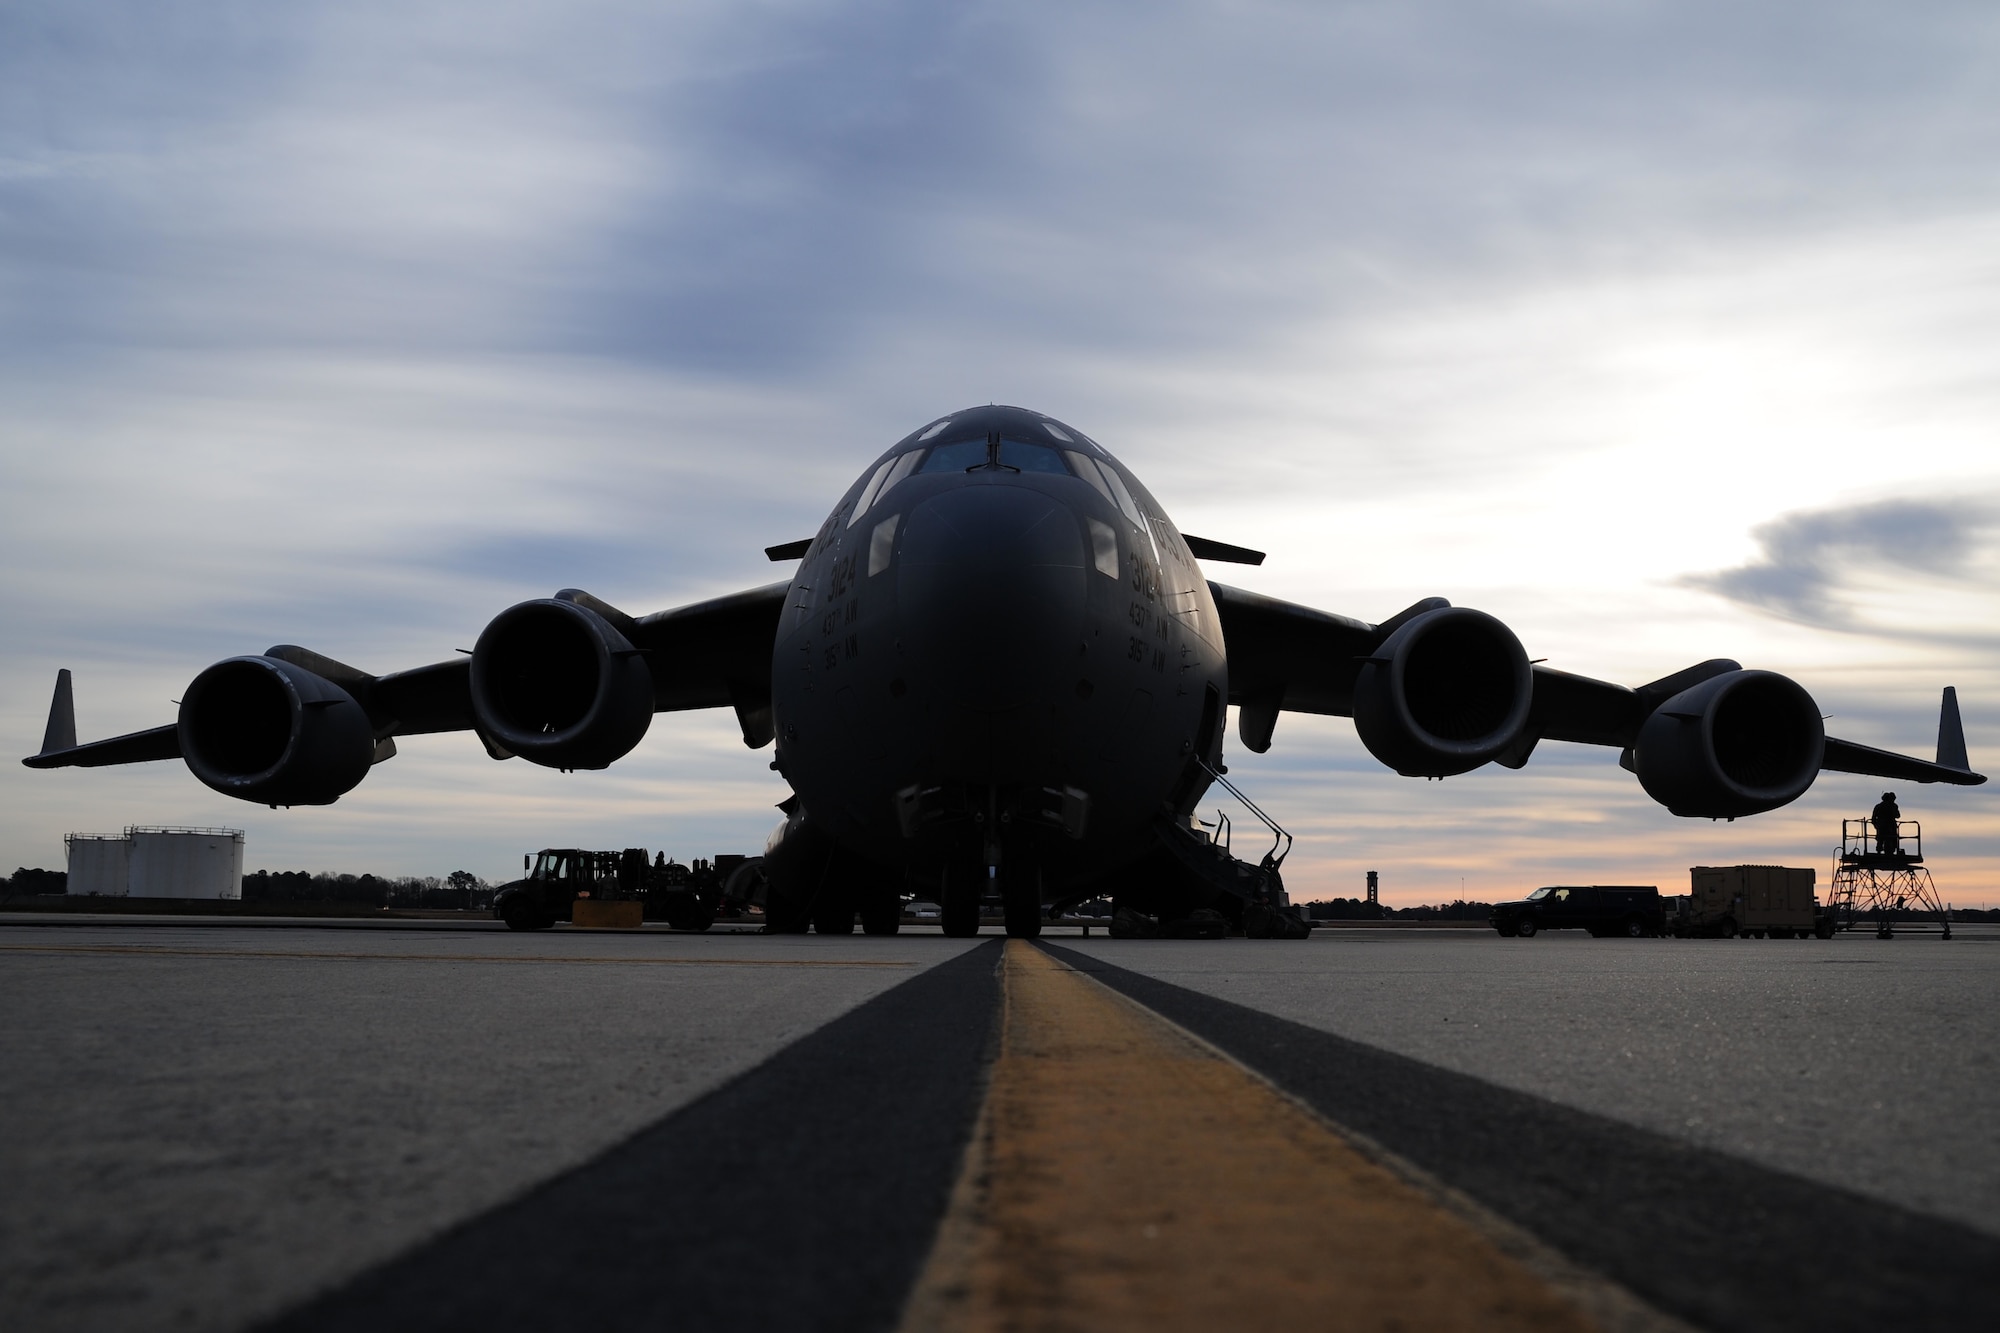 A C-17 Globemaster III is prepared for departure during training exercise Patriot Sands Feb. 17, 2016, at Hunter Army Airfield, Georgia. (U.S. Air Force Photo by Senior Airman Jonathan Lane)